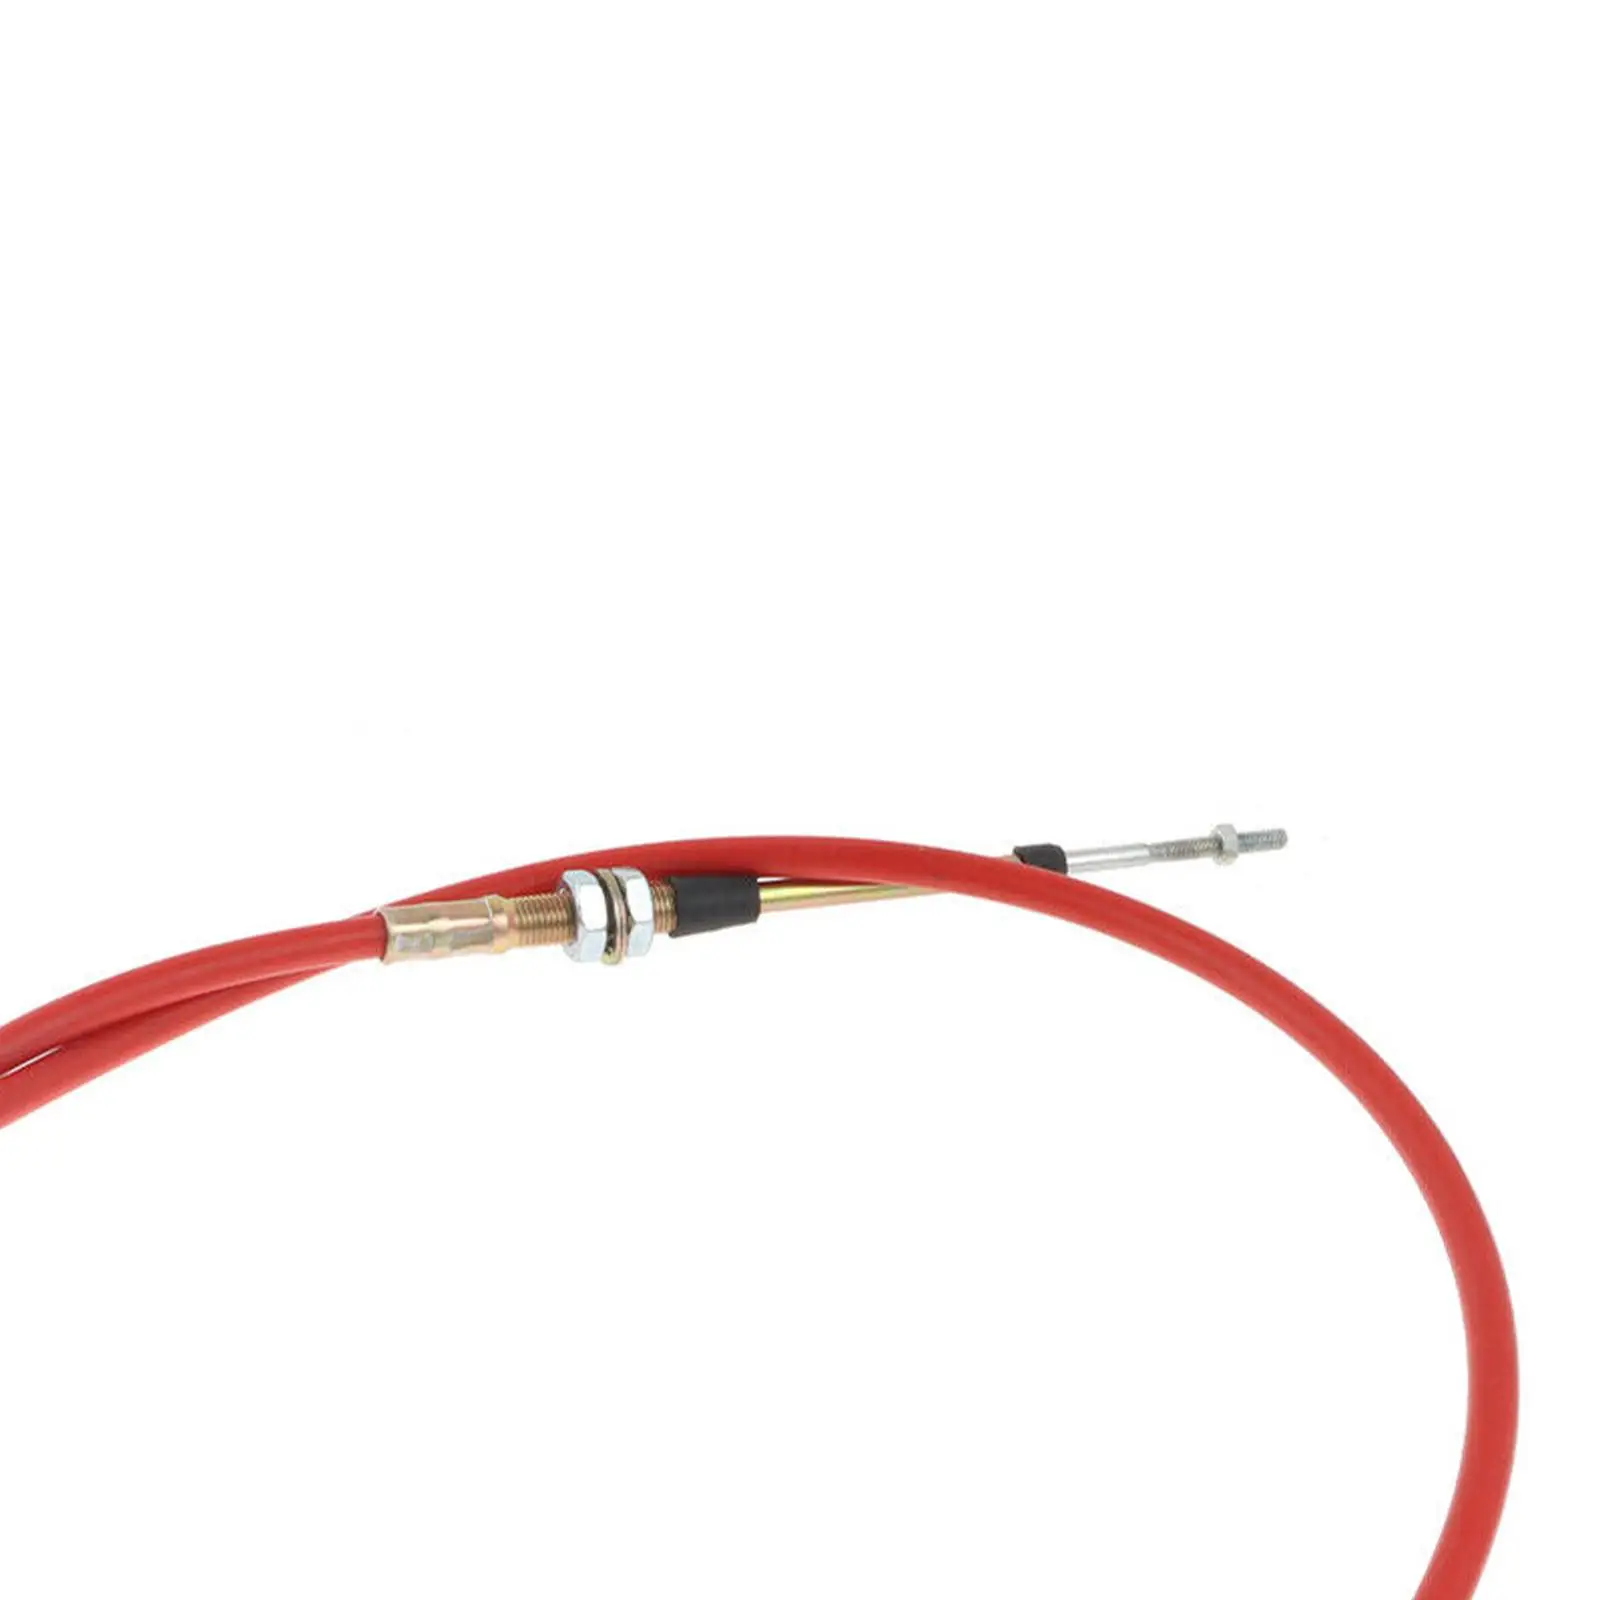 Shifter Cable Heavy Duty AF721002 Car Accessories for B M Shifters Parts High Performance Lightweight Easy to Install